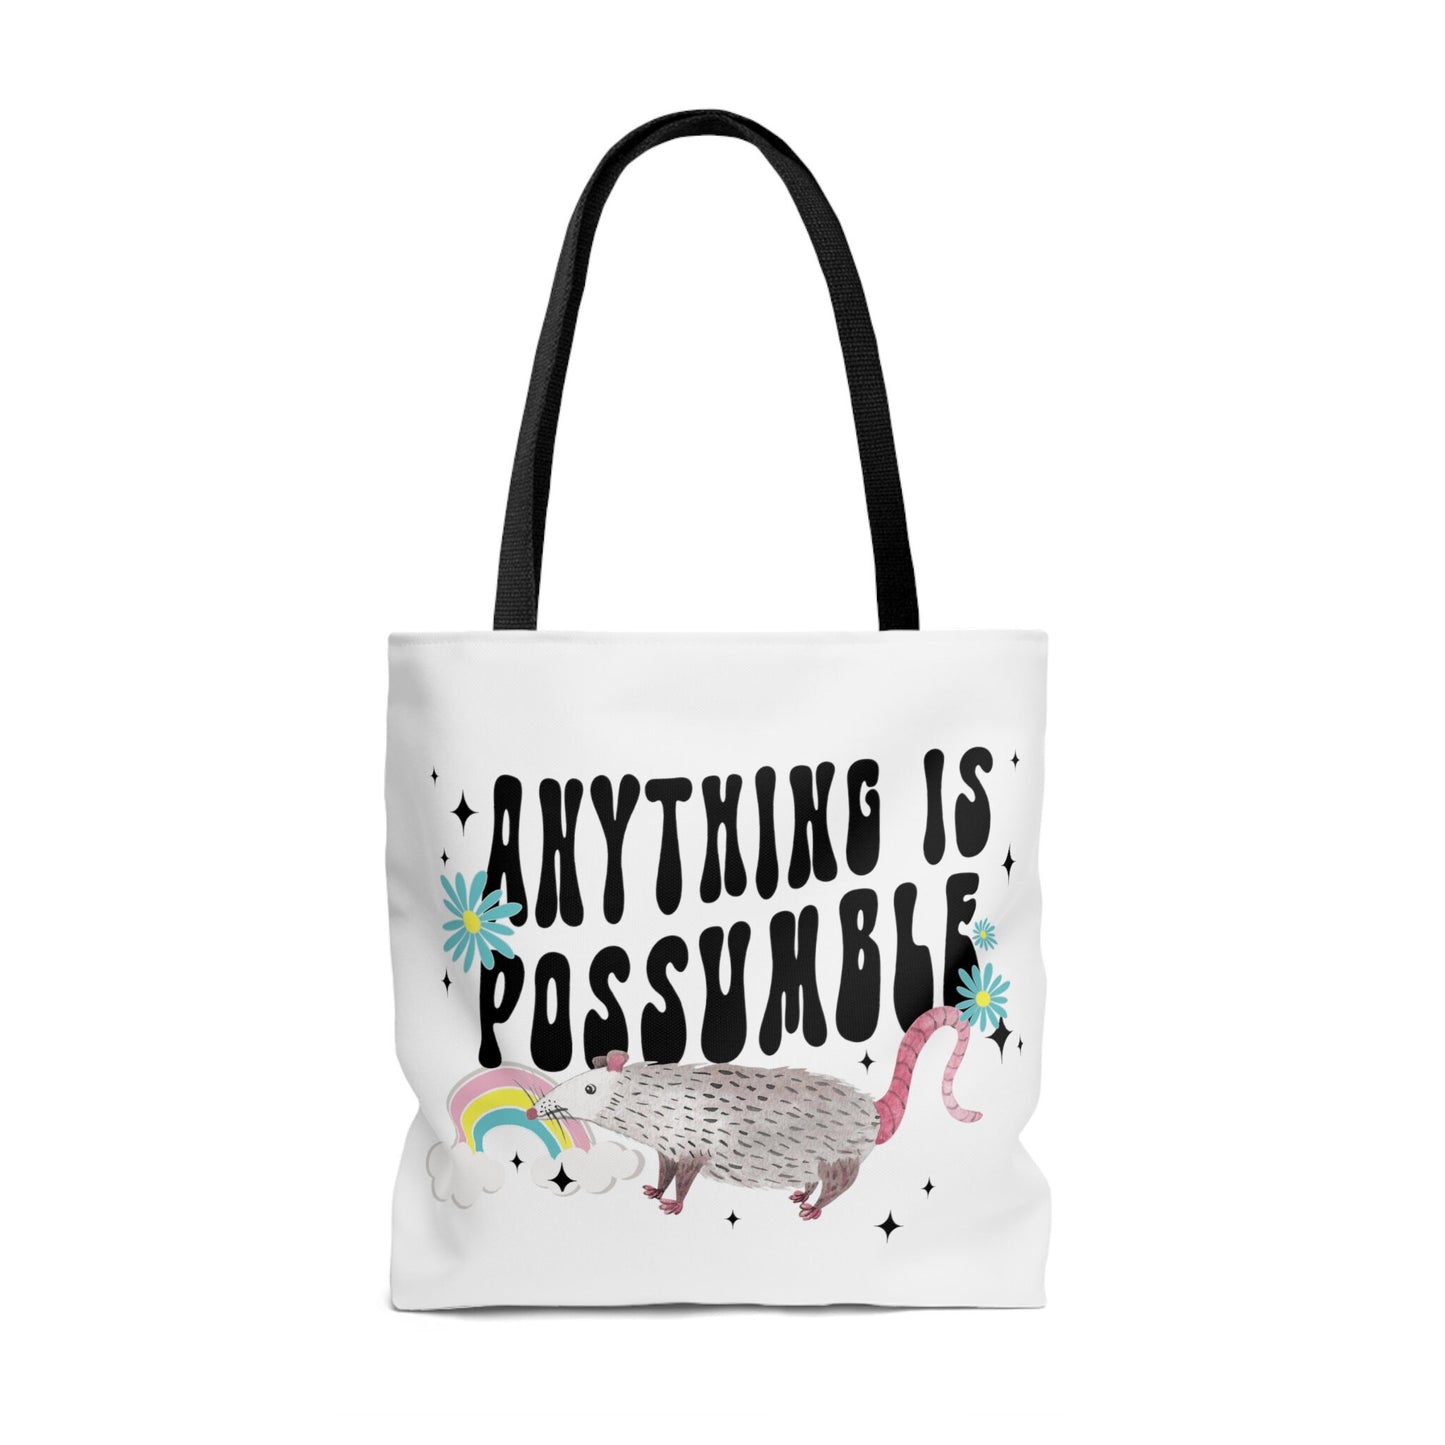 Possum Tote Bag Anything is Possible Reusable Retro Aesthetic Tote Bag Opossum Gift Graduation Gift Rainbow Tote Bag Positive Gift for Teen